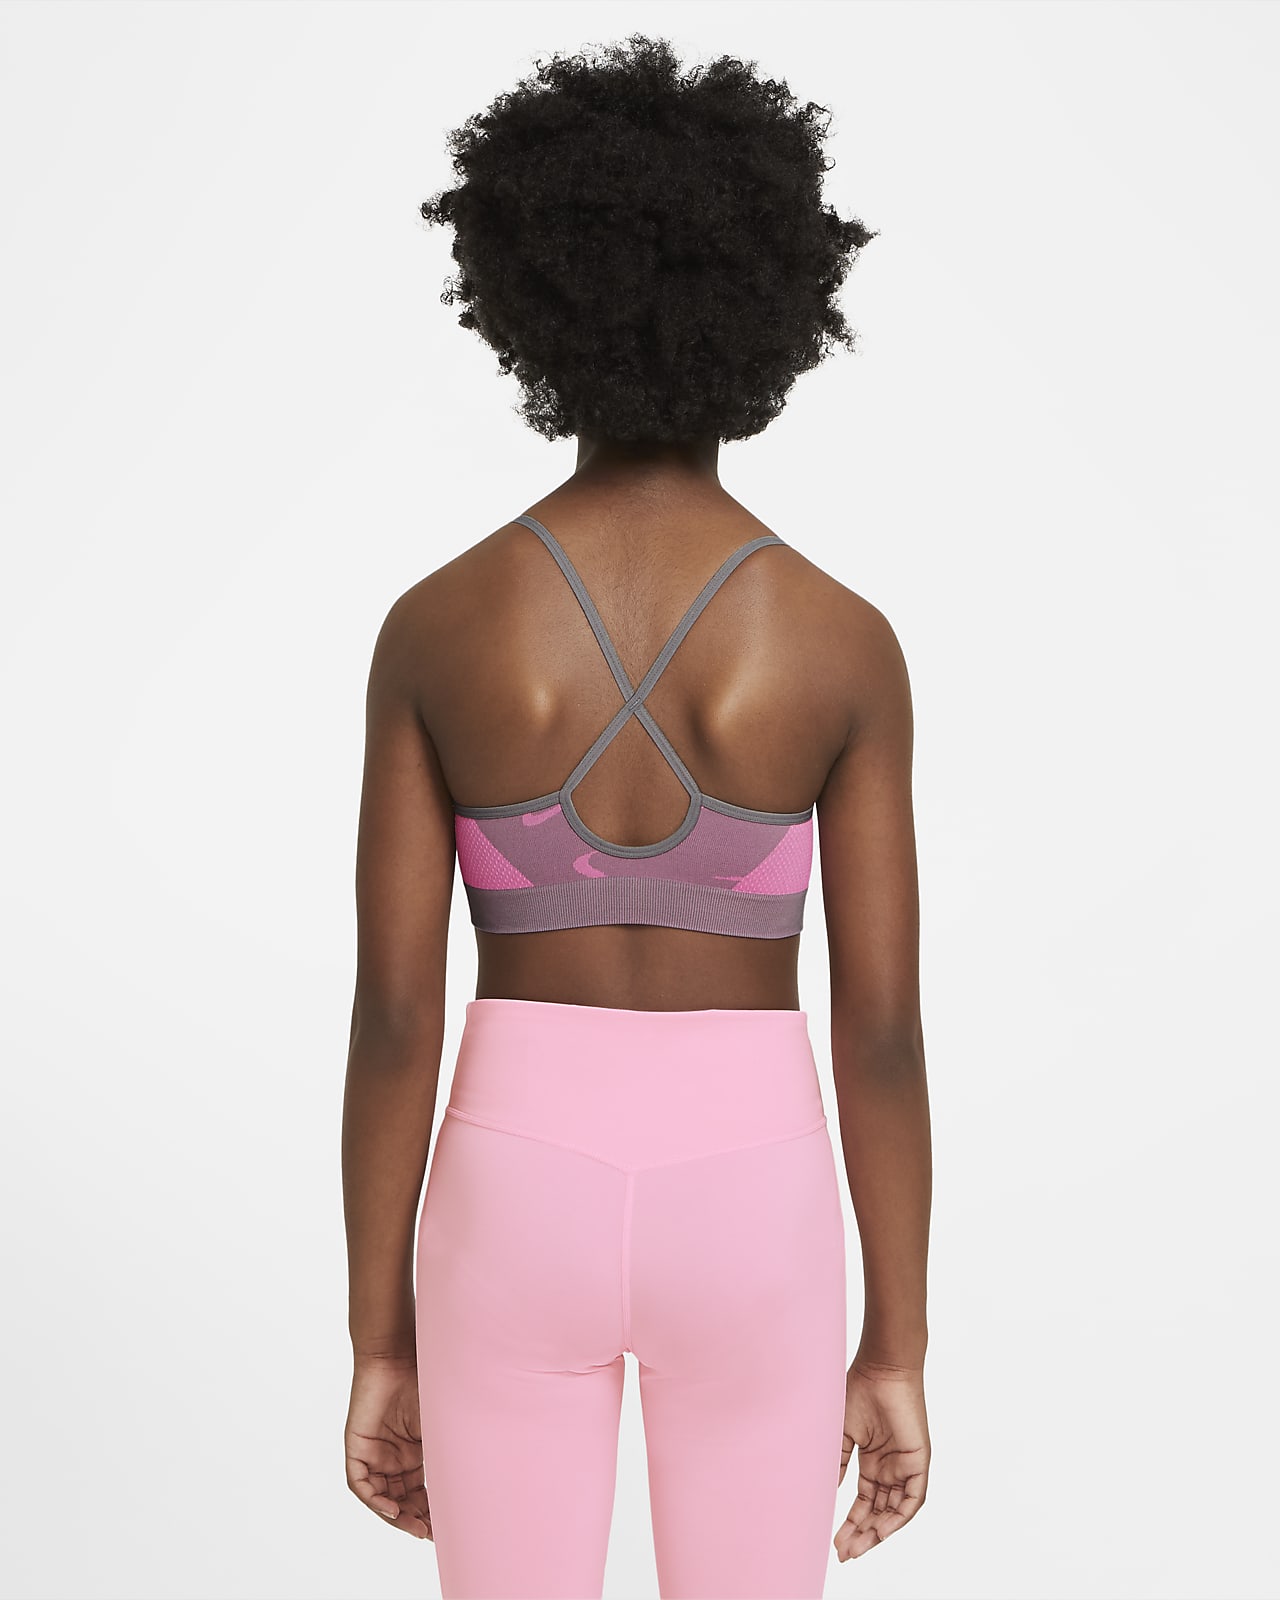 brassiere nike indy rose